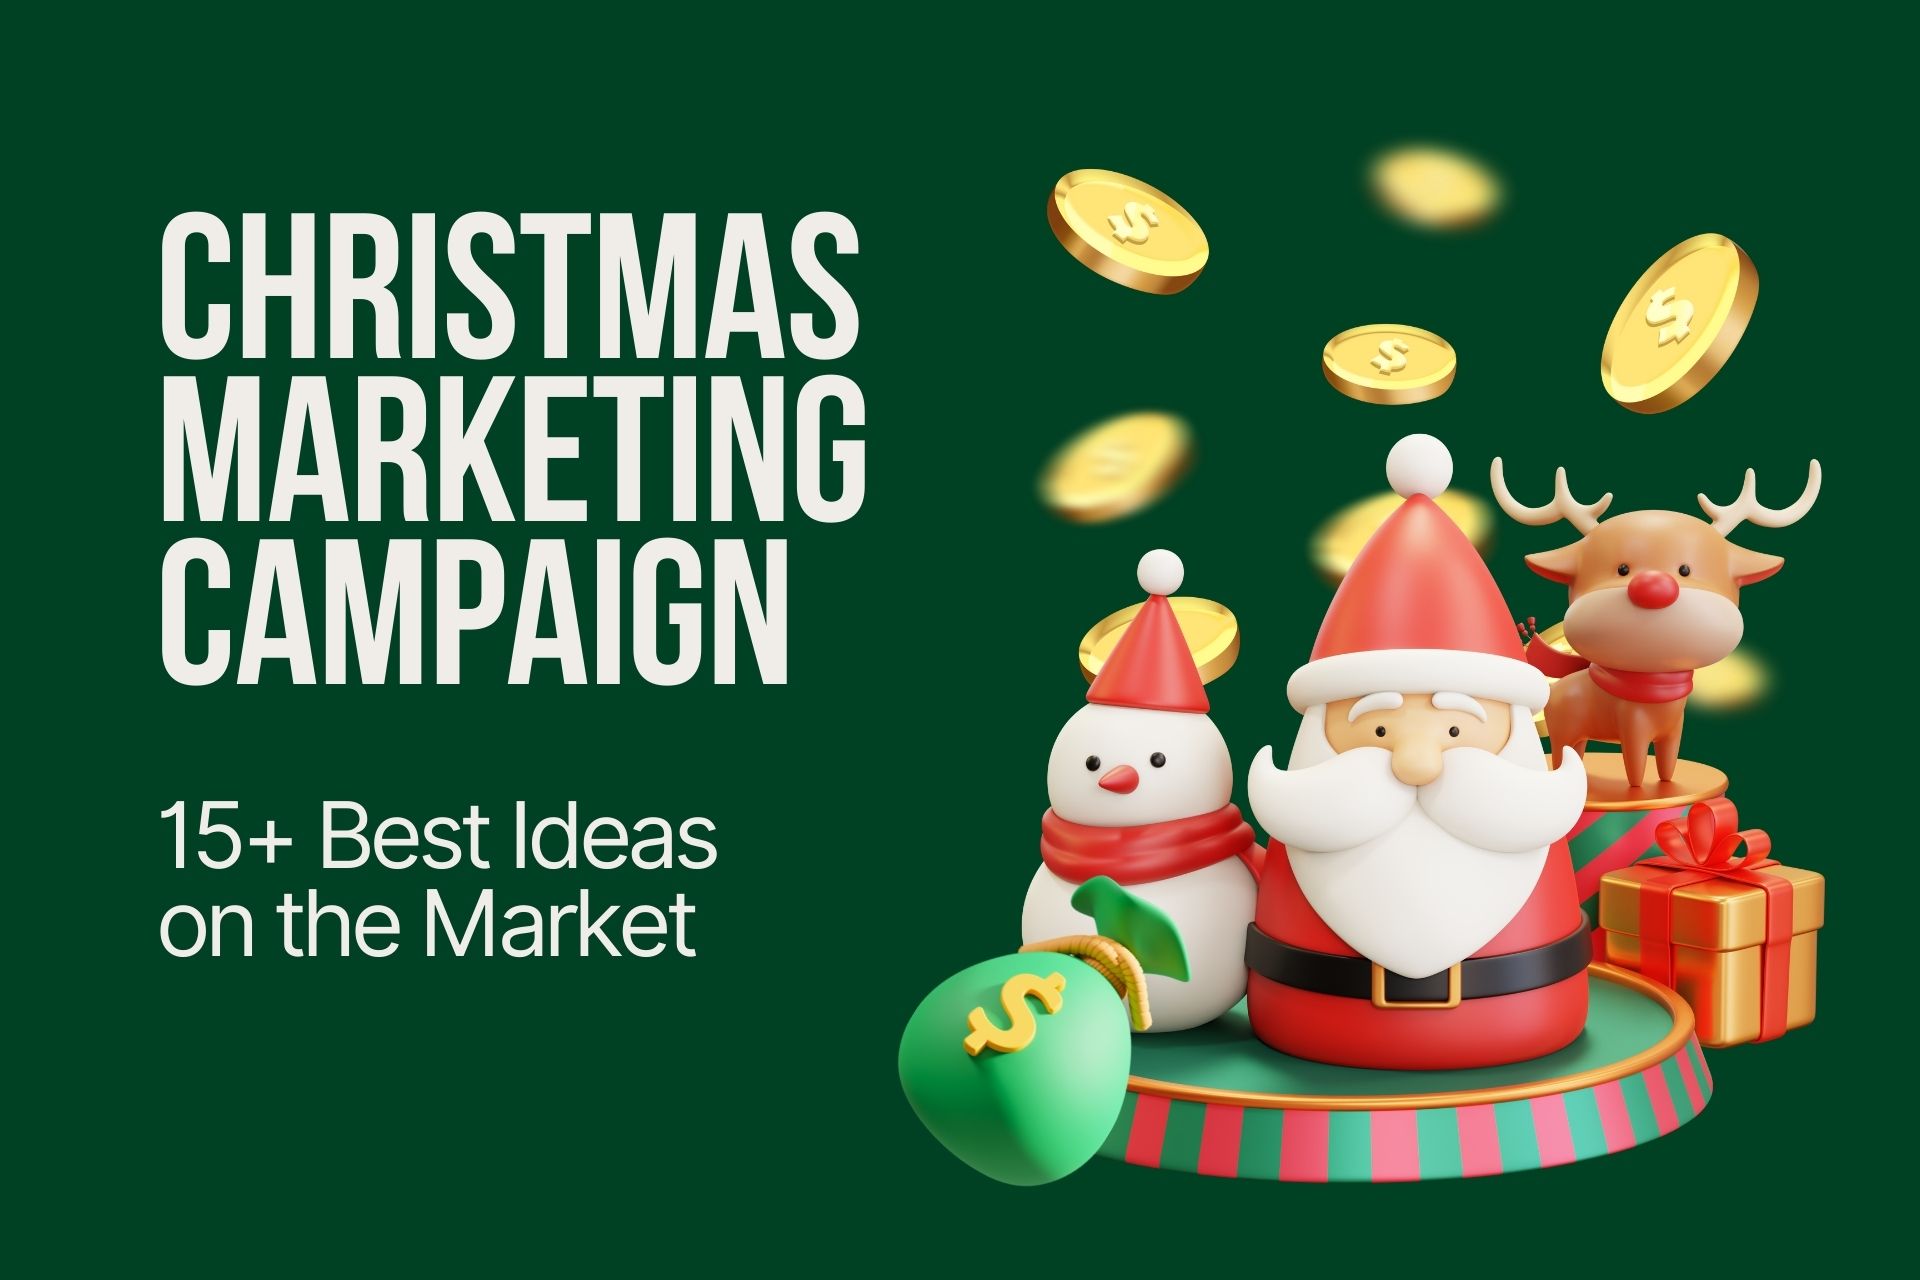 Christmas Marketing Campaign: 15+ Best Ideas on the Market